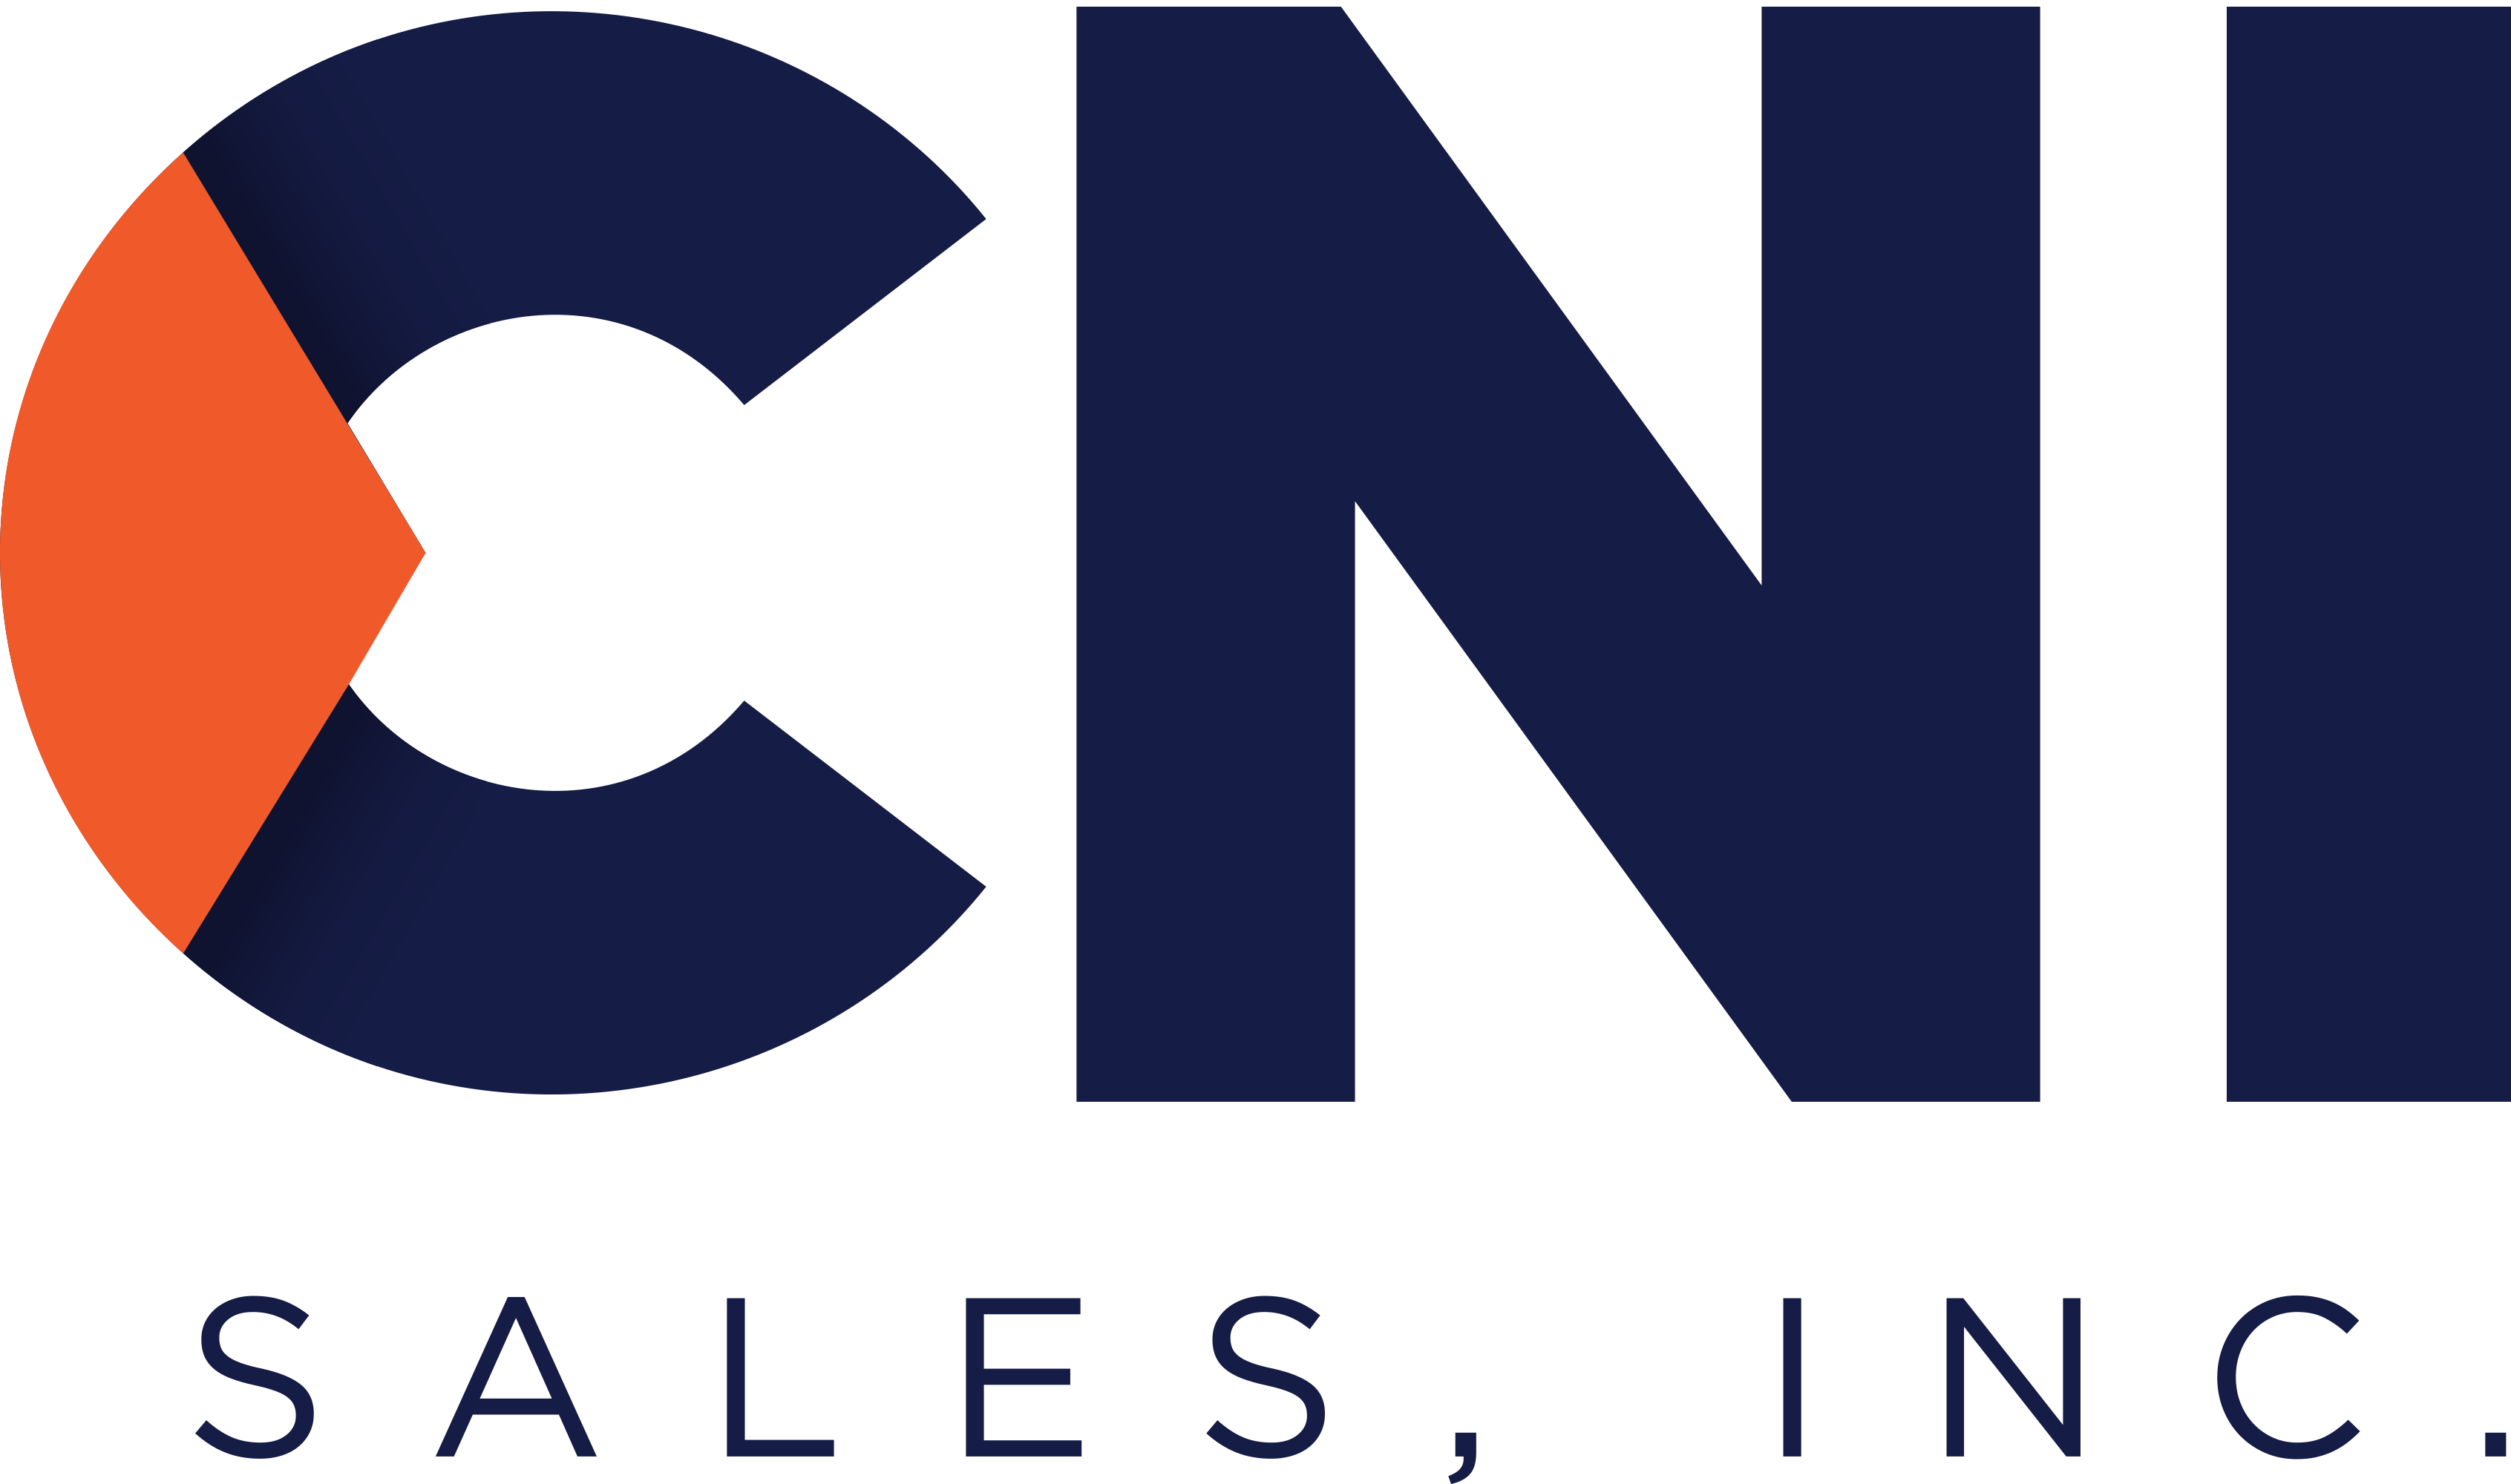 CNI Sales, Inc. Logo in blue with an orange accent on the C in CNI.